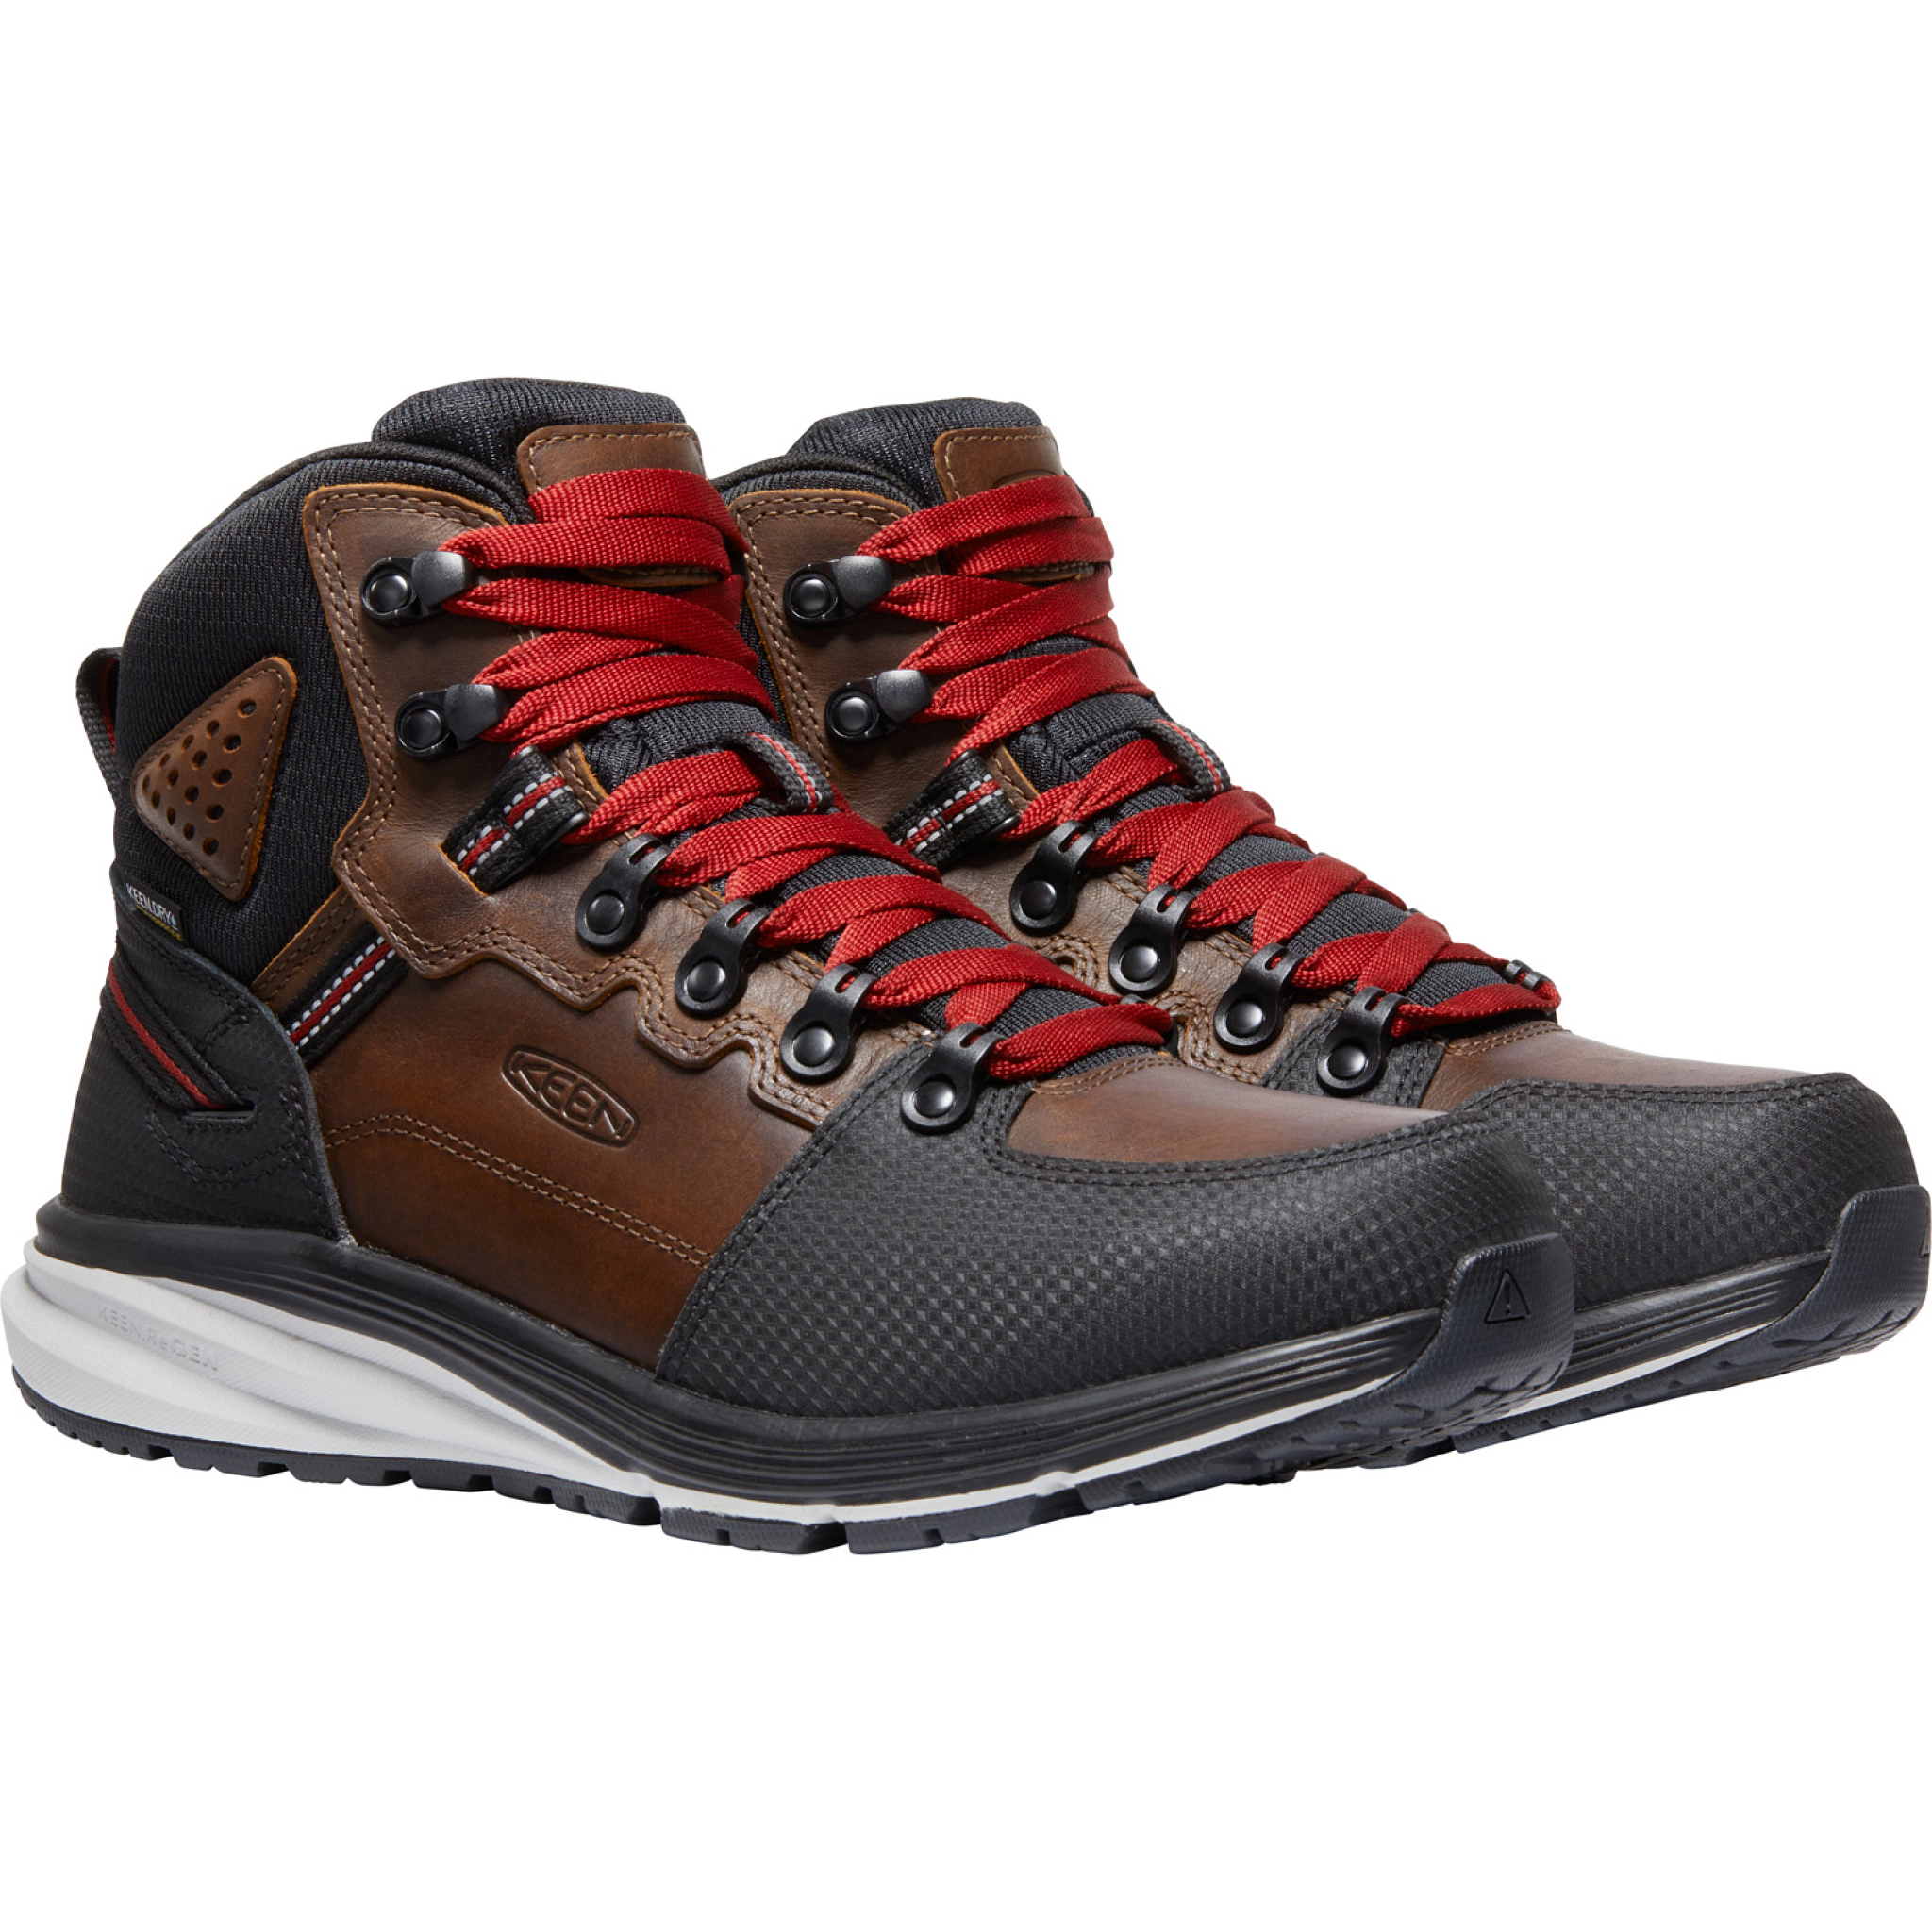 KEEN Utility Men's Red Hook Mid Soft Toe WP Work Boot Tobacco- 1025618 15 / Wide / Tobacco - Overlook Boots